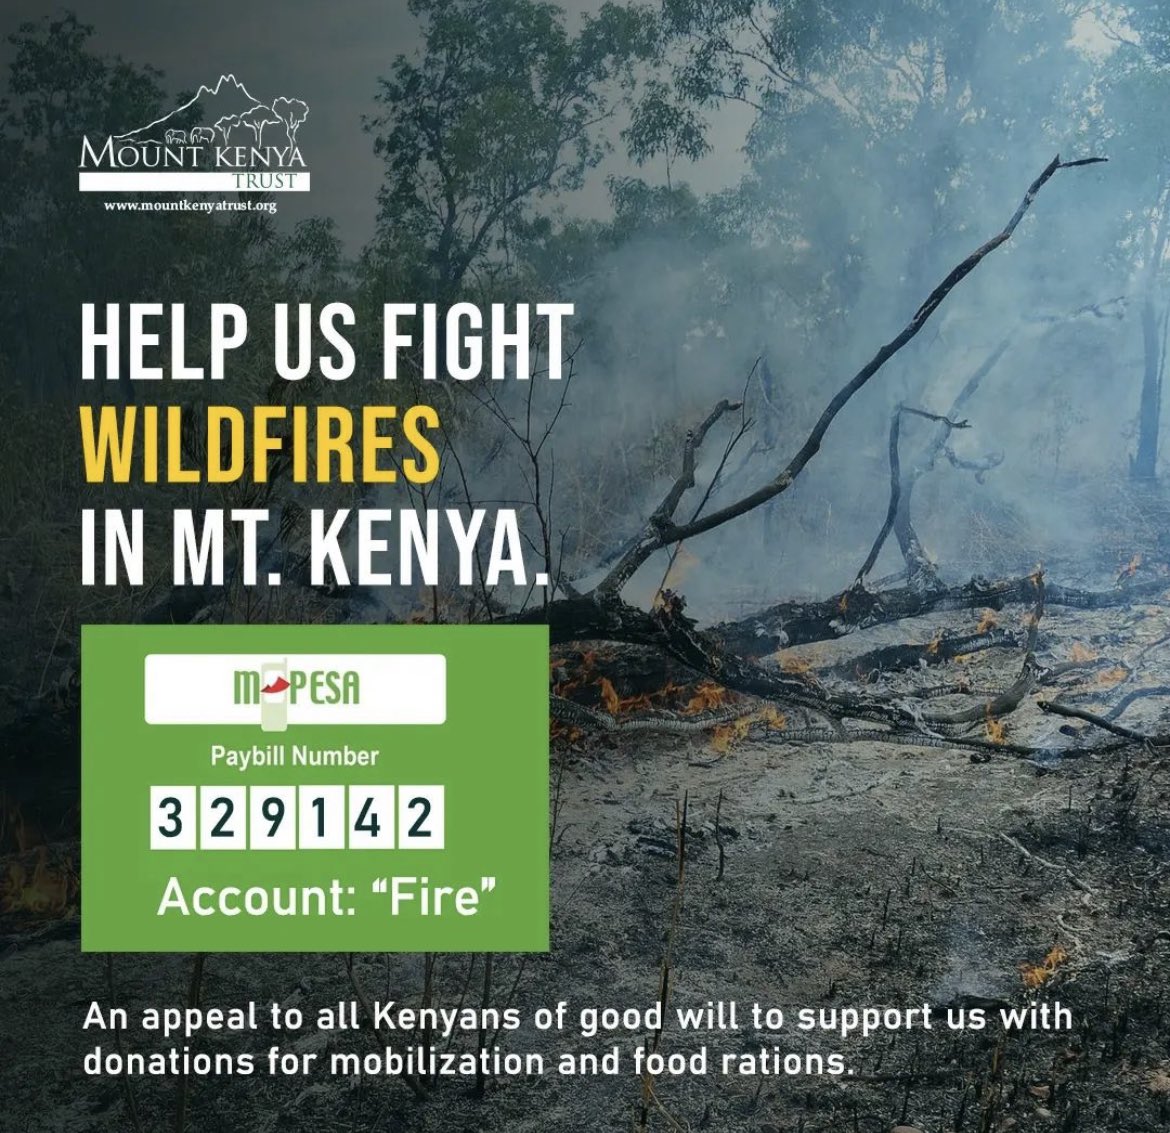 Here’s how you can help donate for the #ForestFires #MtKenya mountkenyatrust.enthuse.com/cp/52a95/fundr… M-Pesa PayBill: 329142 Account: Fire Photo credits @andreyjosephs